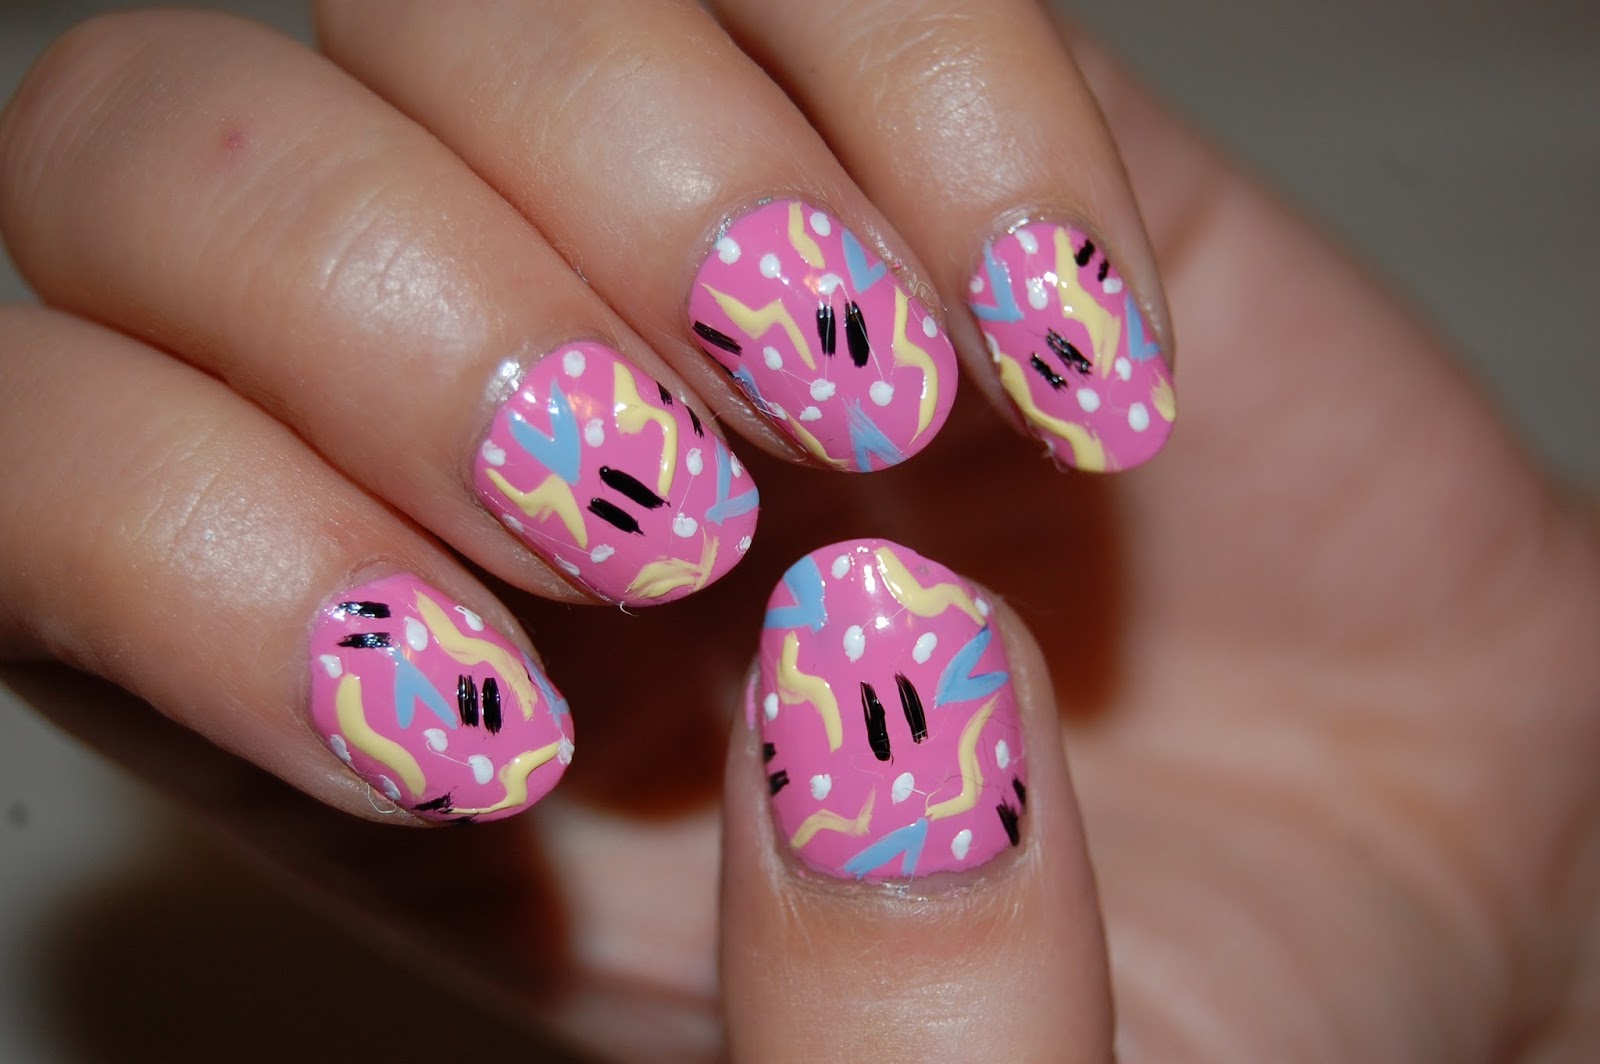 3. "Fresh Prince of Bel-Air" themed nails - wide 7